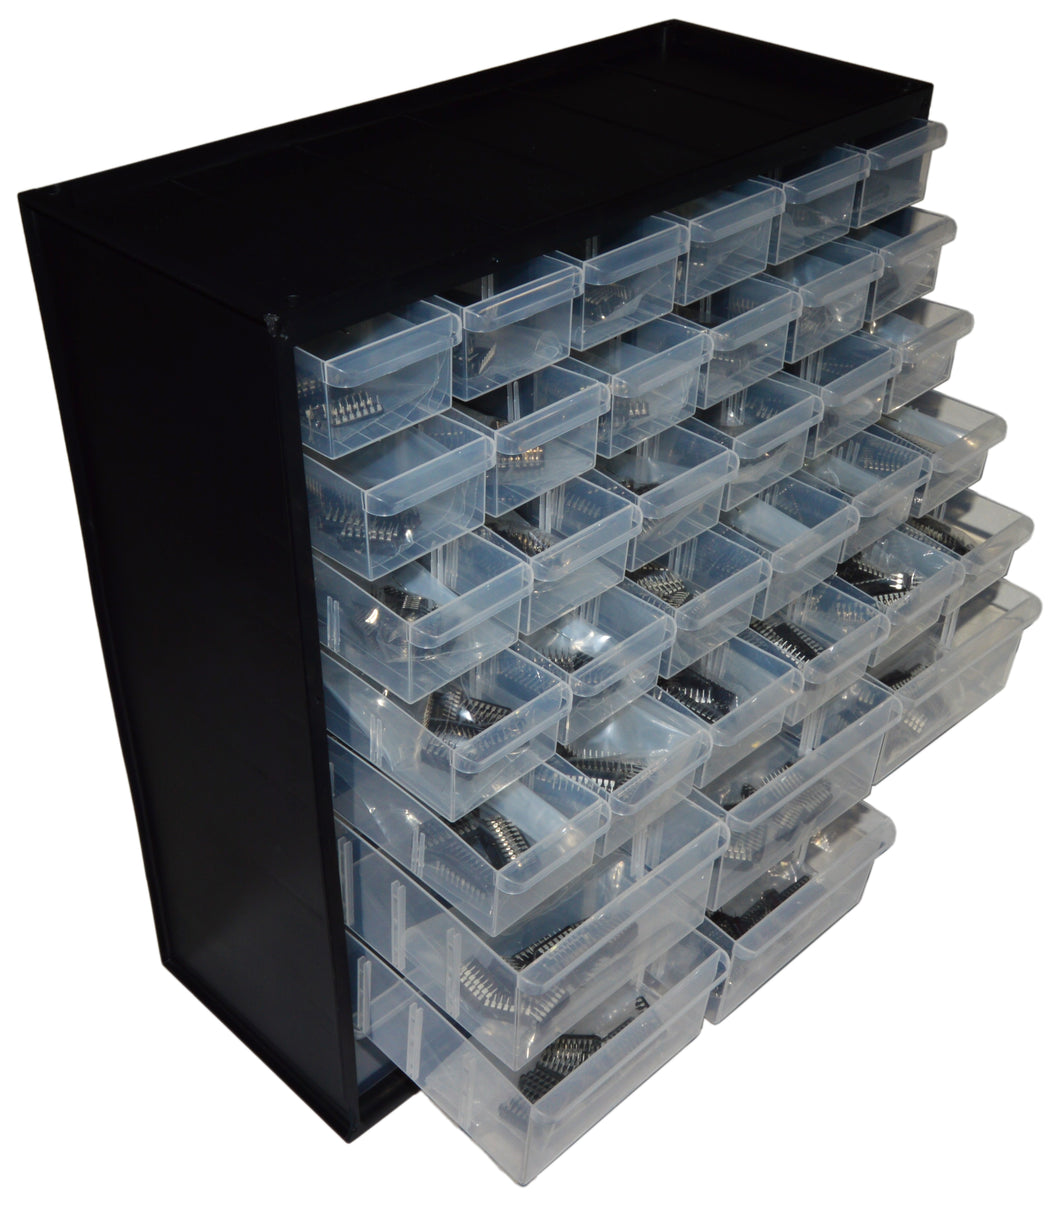 375 Piece Linear IC Assortment Kit with 34 Types of Linear Integrated Circuits in Electronic Component Cabinet Storage Case